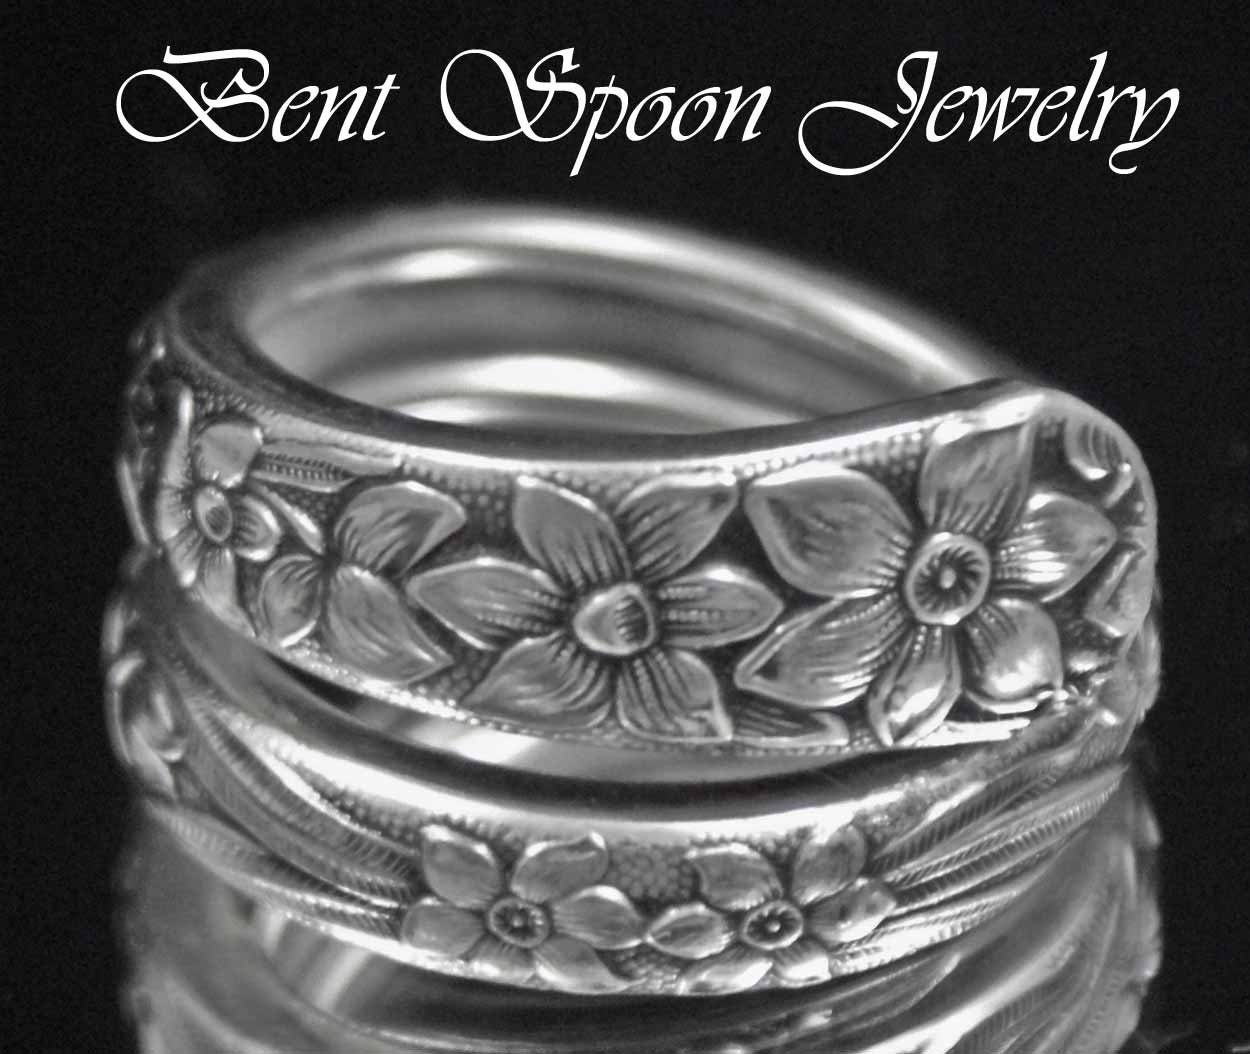 Spoon Ring Silverware Jewelry Narcissus 1935 by Bentspoonjewelry